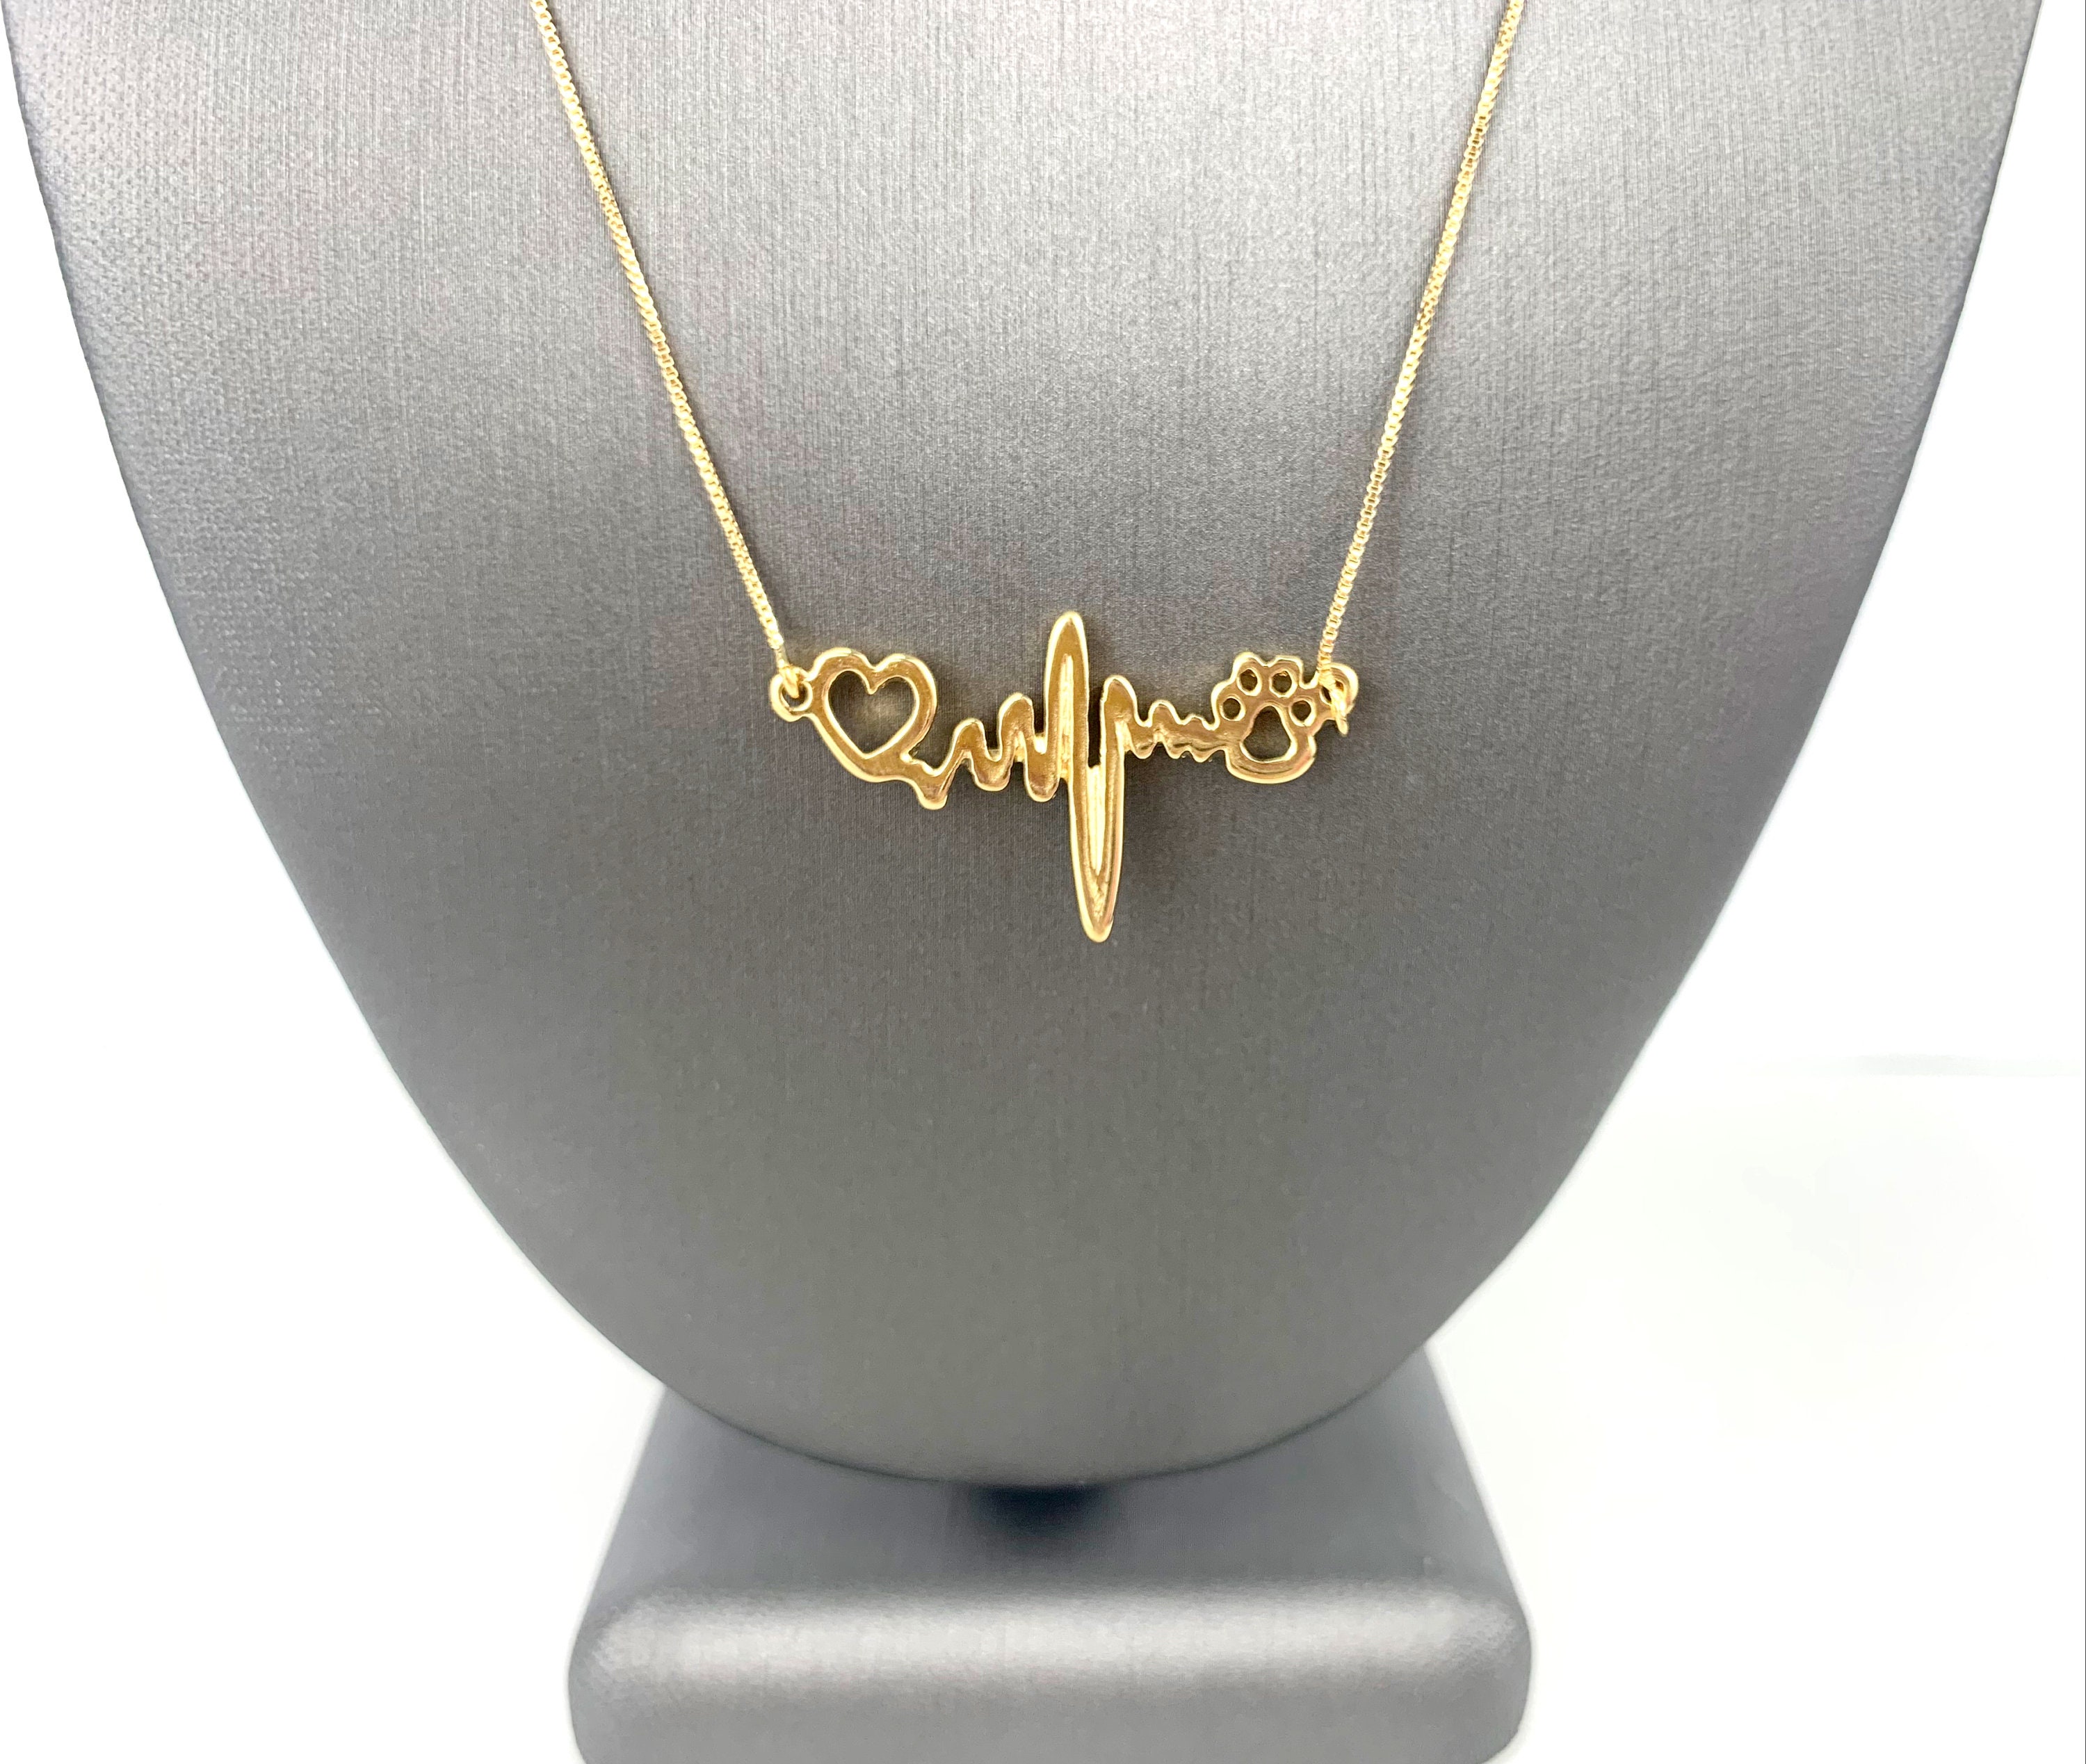 Dog Paw and Heartbeat Necklace 18k Solid Yellow Gold Lover Dog Pet Heartbeat Necklace for Women Girls and Teens